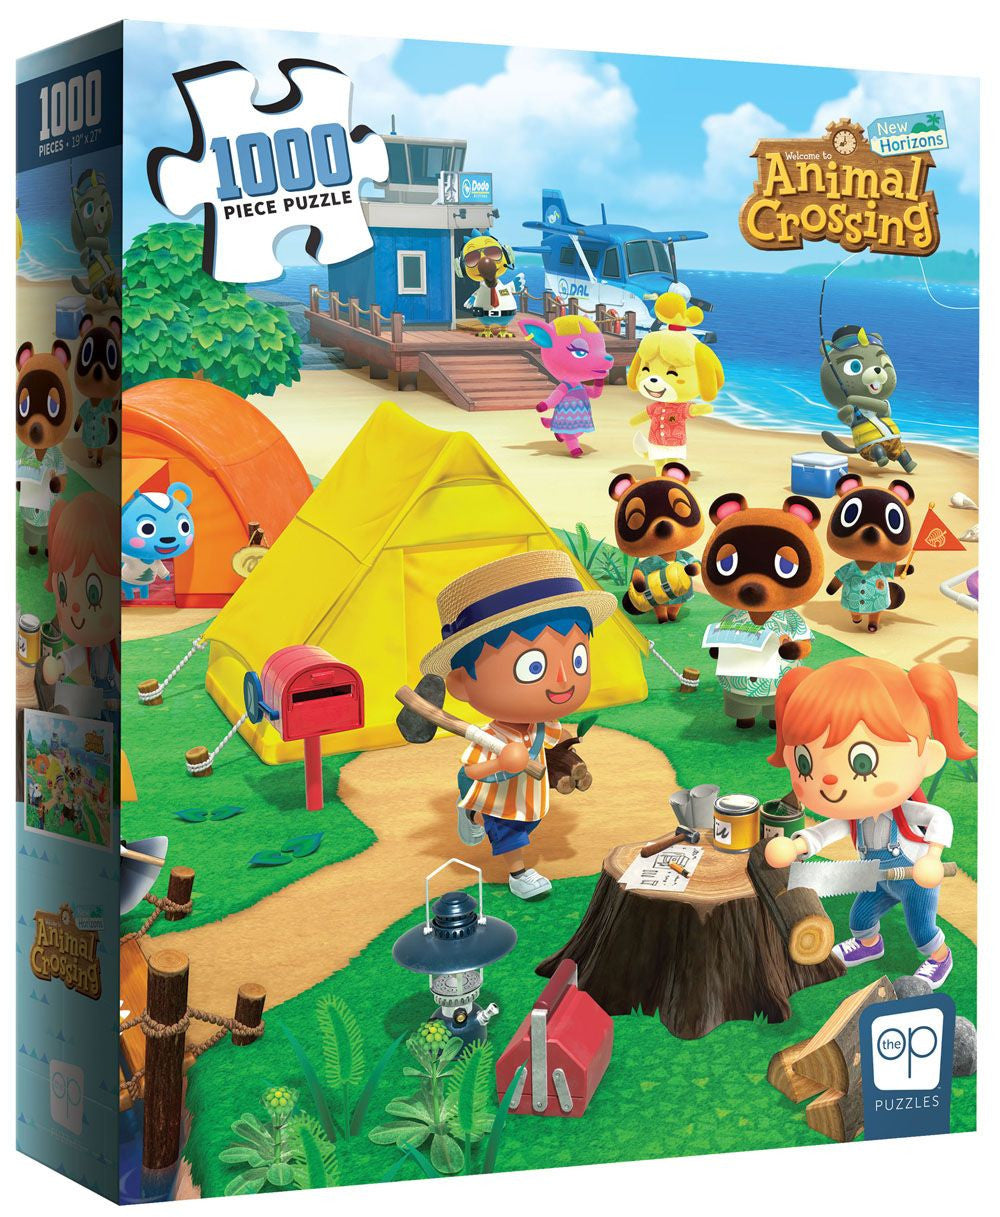 The-Op-Animal-Crossing-New-Horizons-Welcome-to-Animal-Crossing-Puzzle-1,000-pieces